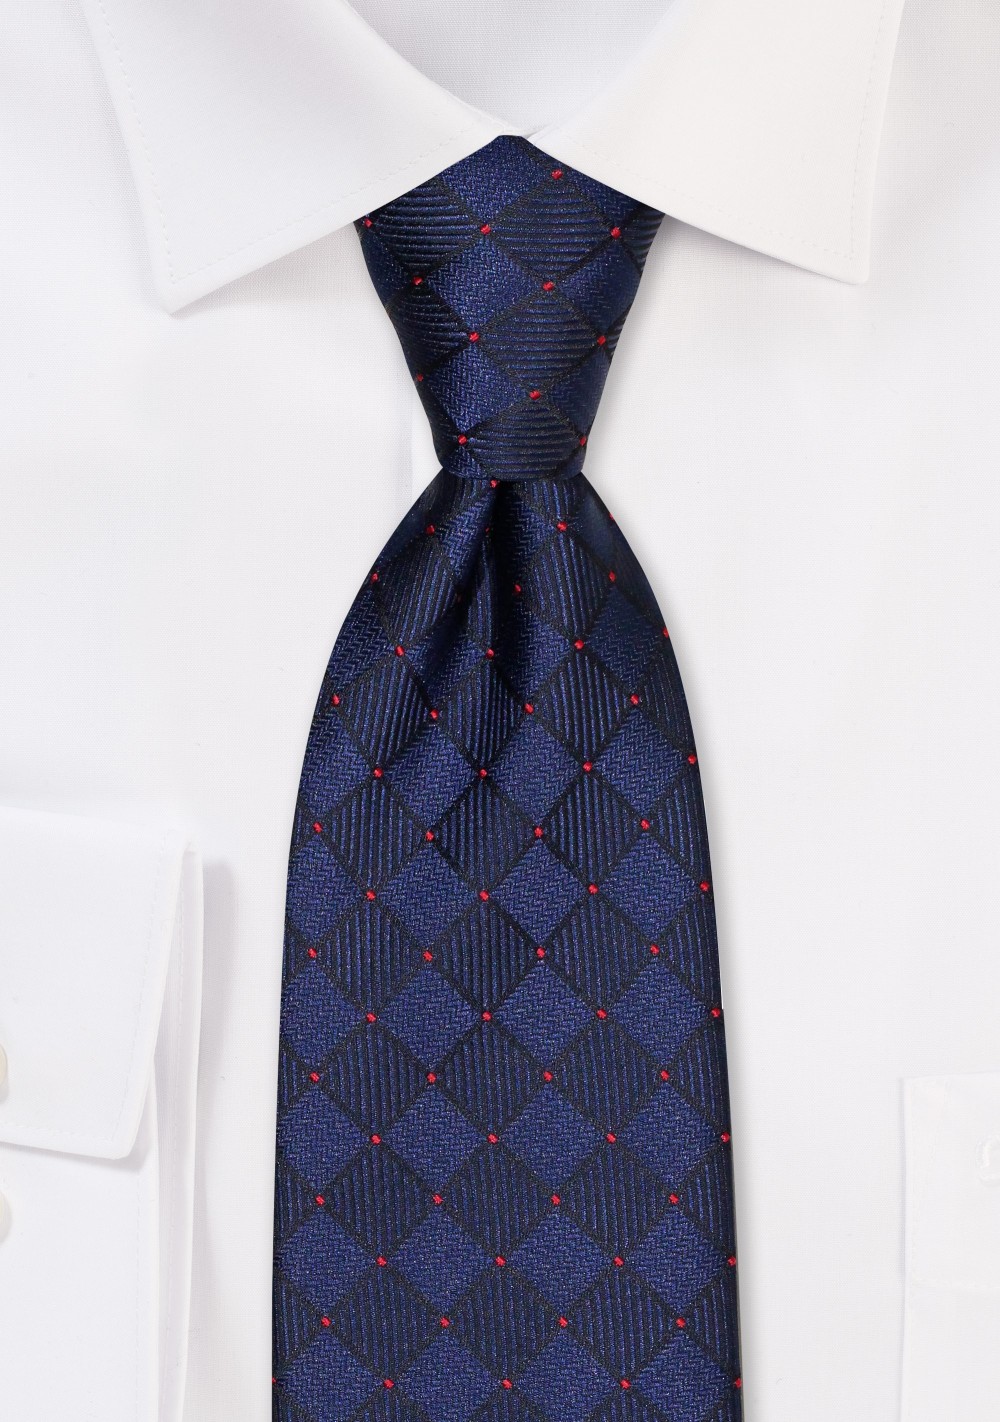 Marine Blue Tie with Woven Check Design